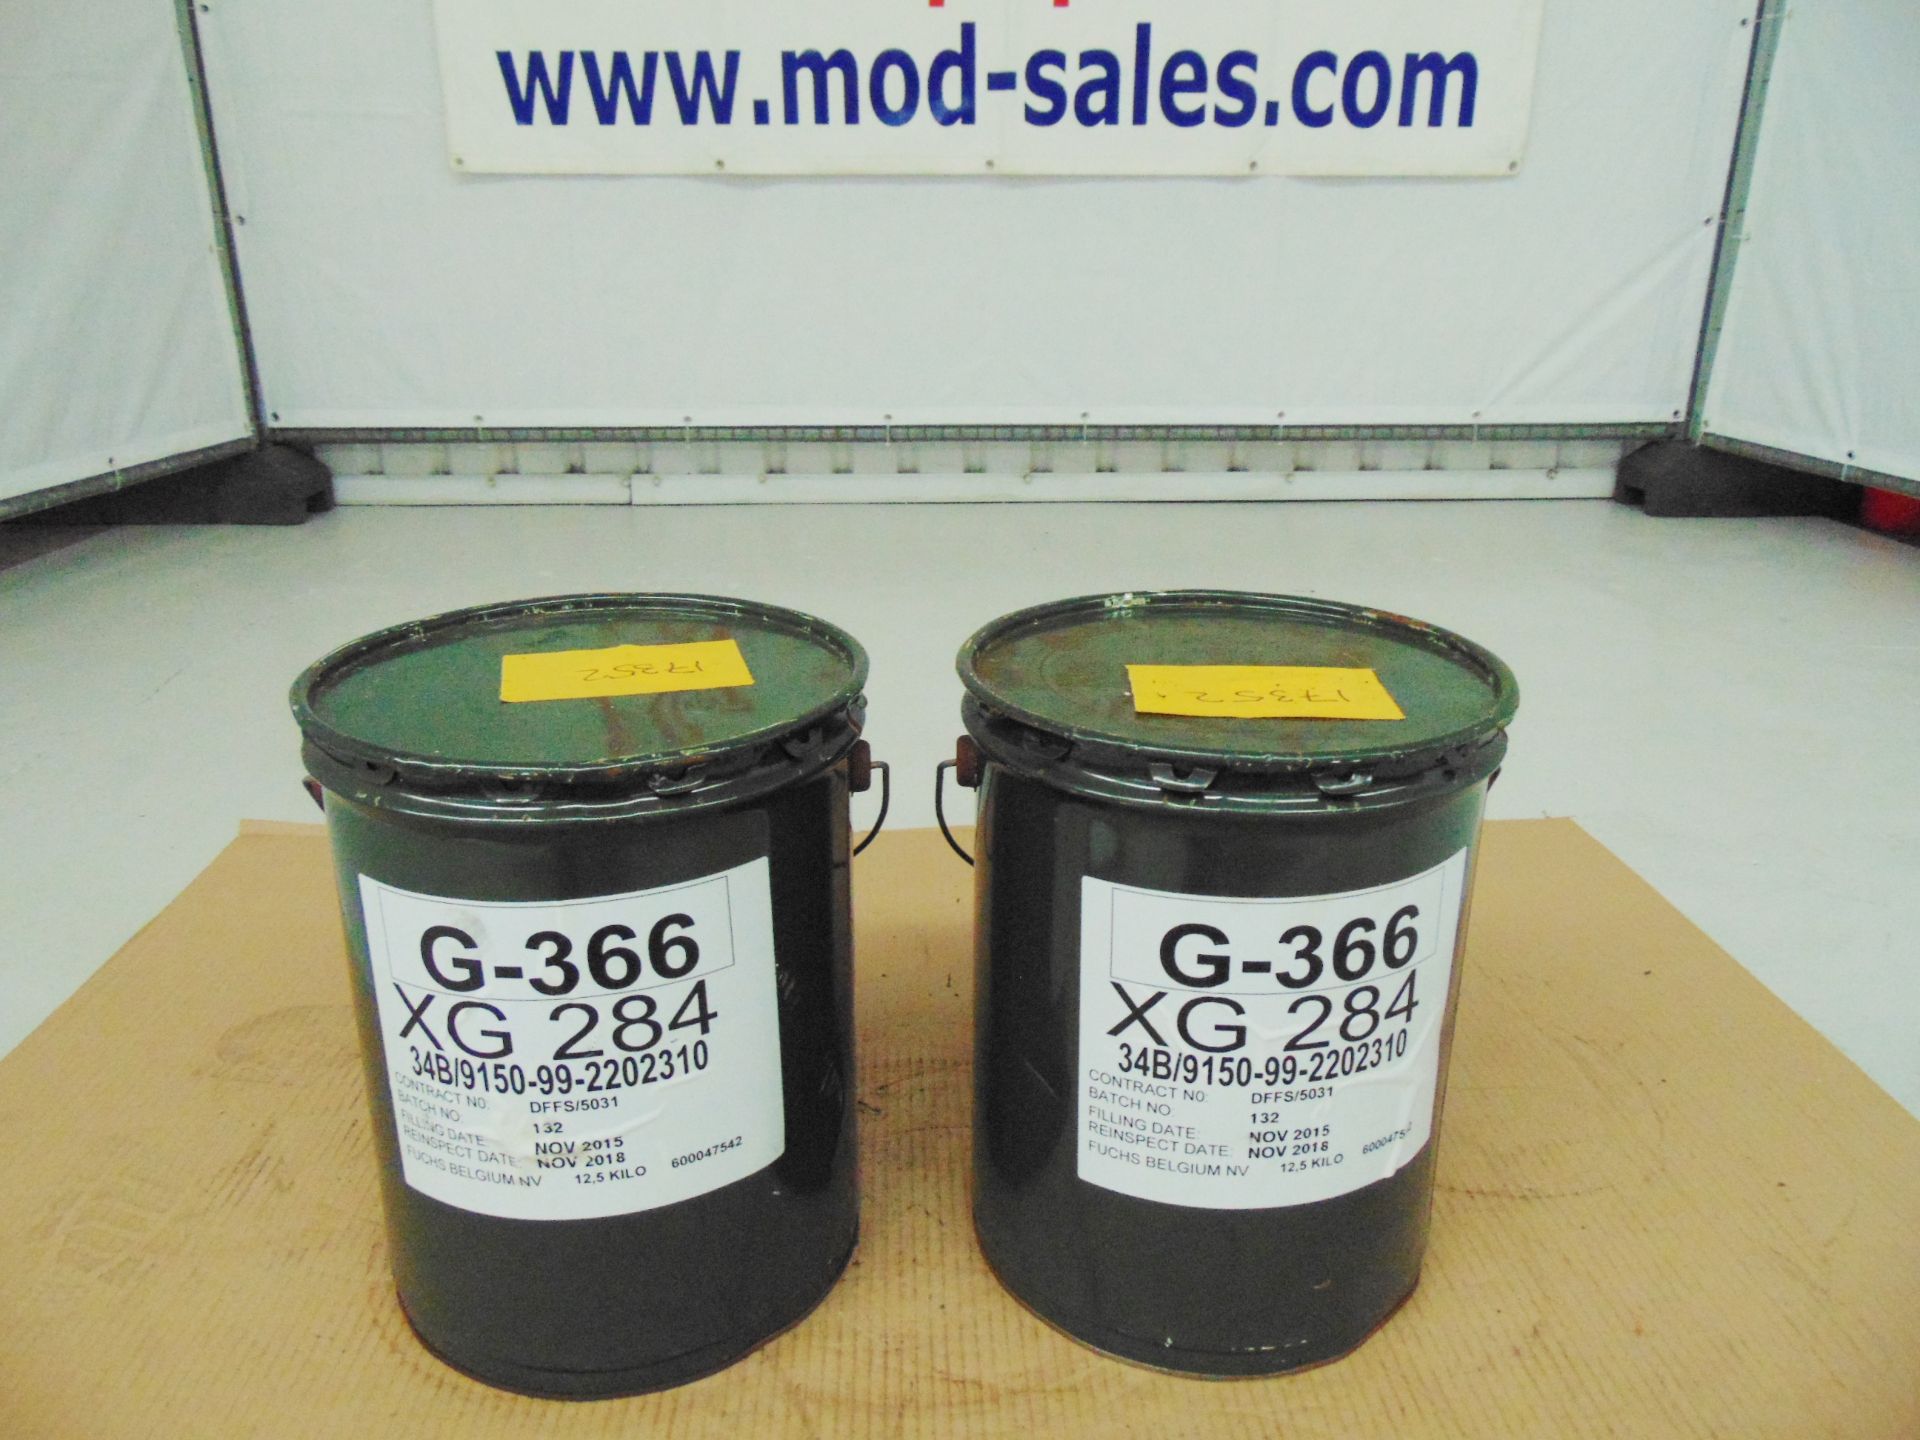 2 x Unissued 12.5Kg Tins of XG-284 G-366 Grease